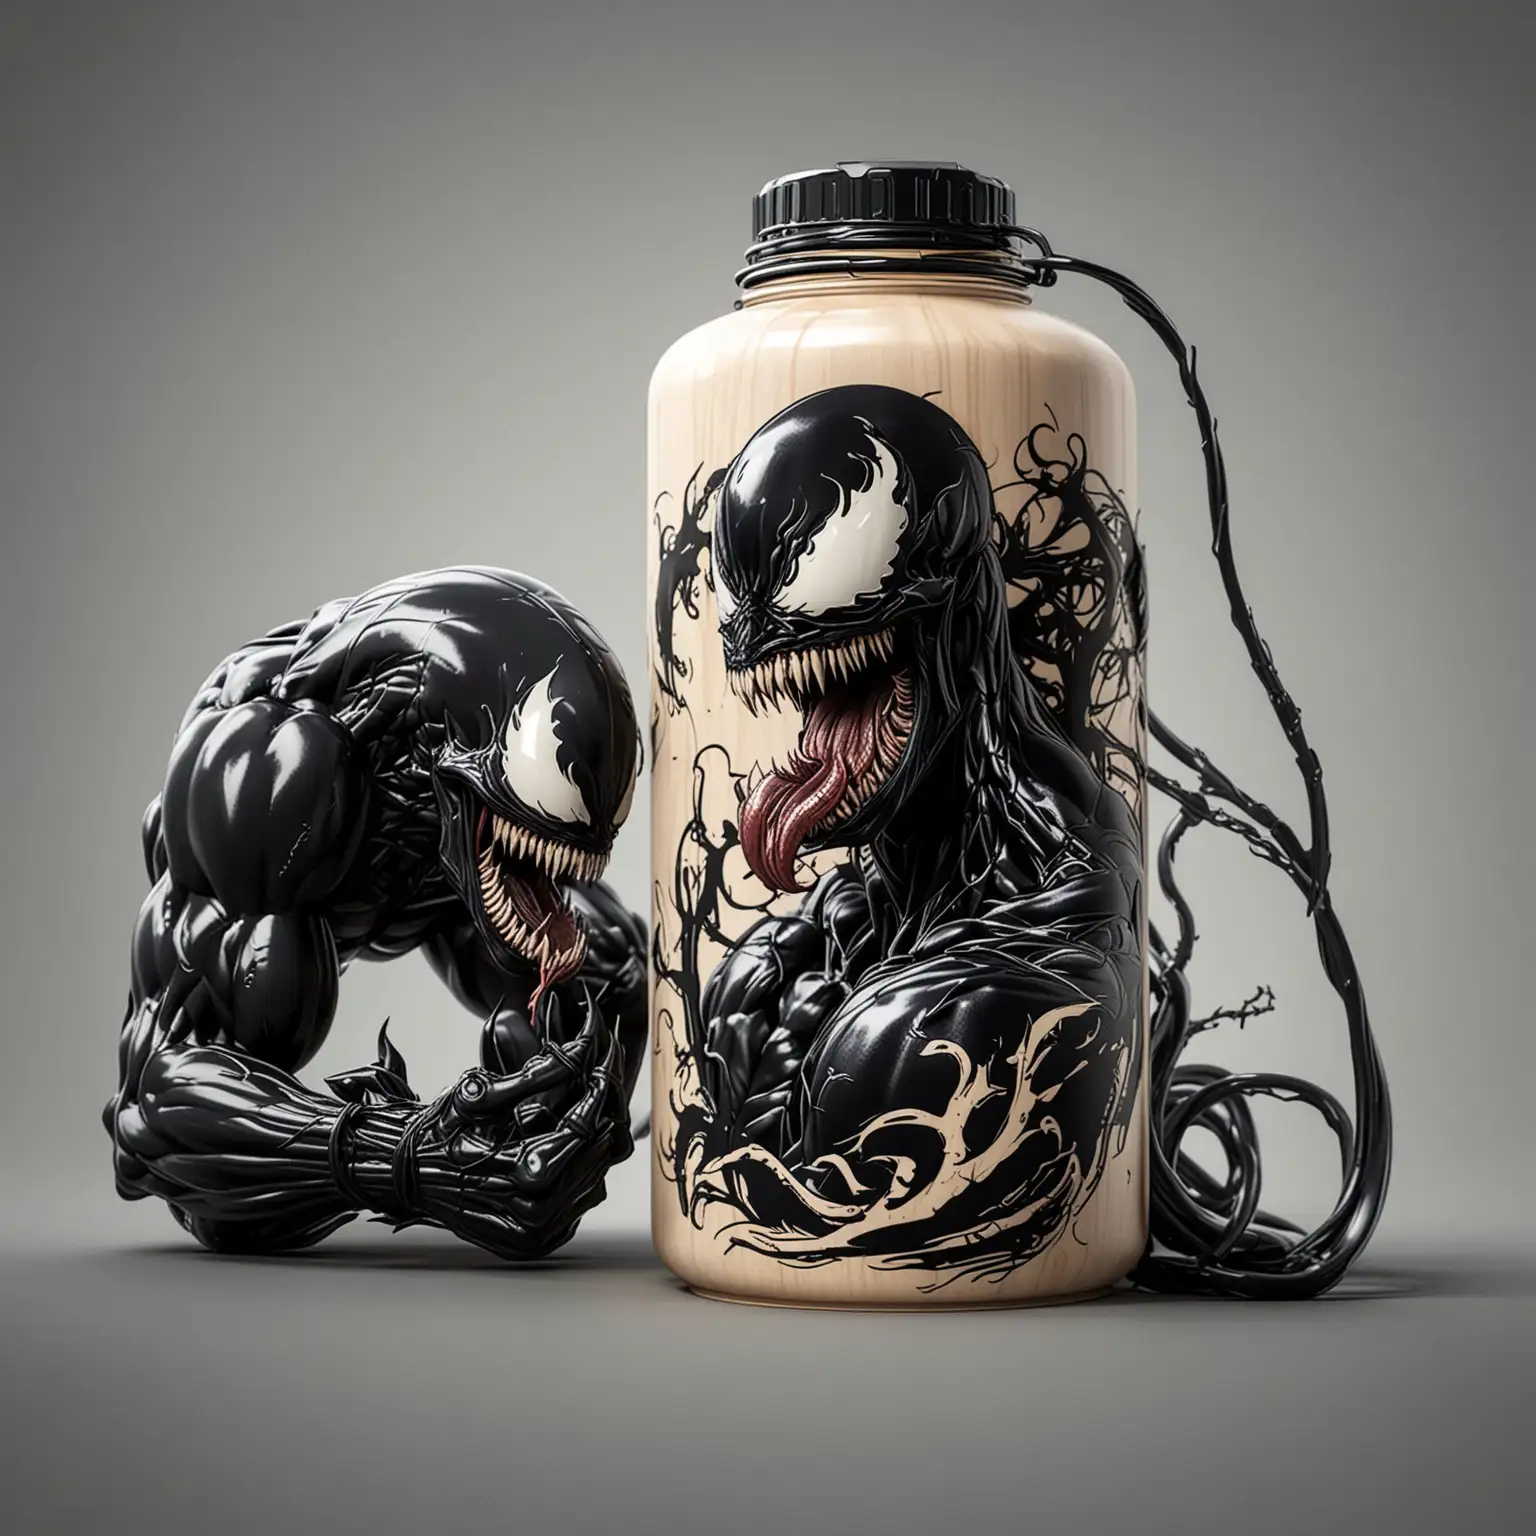 Venom Symbiote in Canister Profile View Comic Book Style Laser Engraving